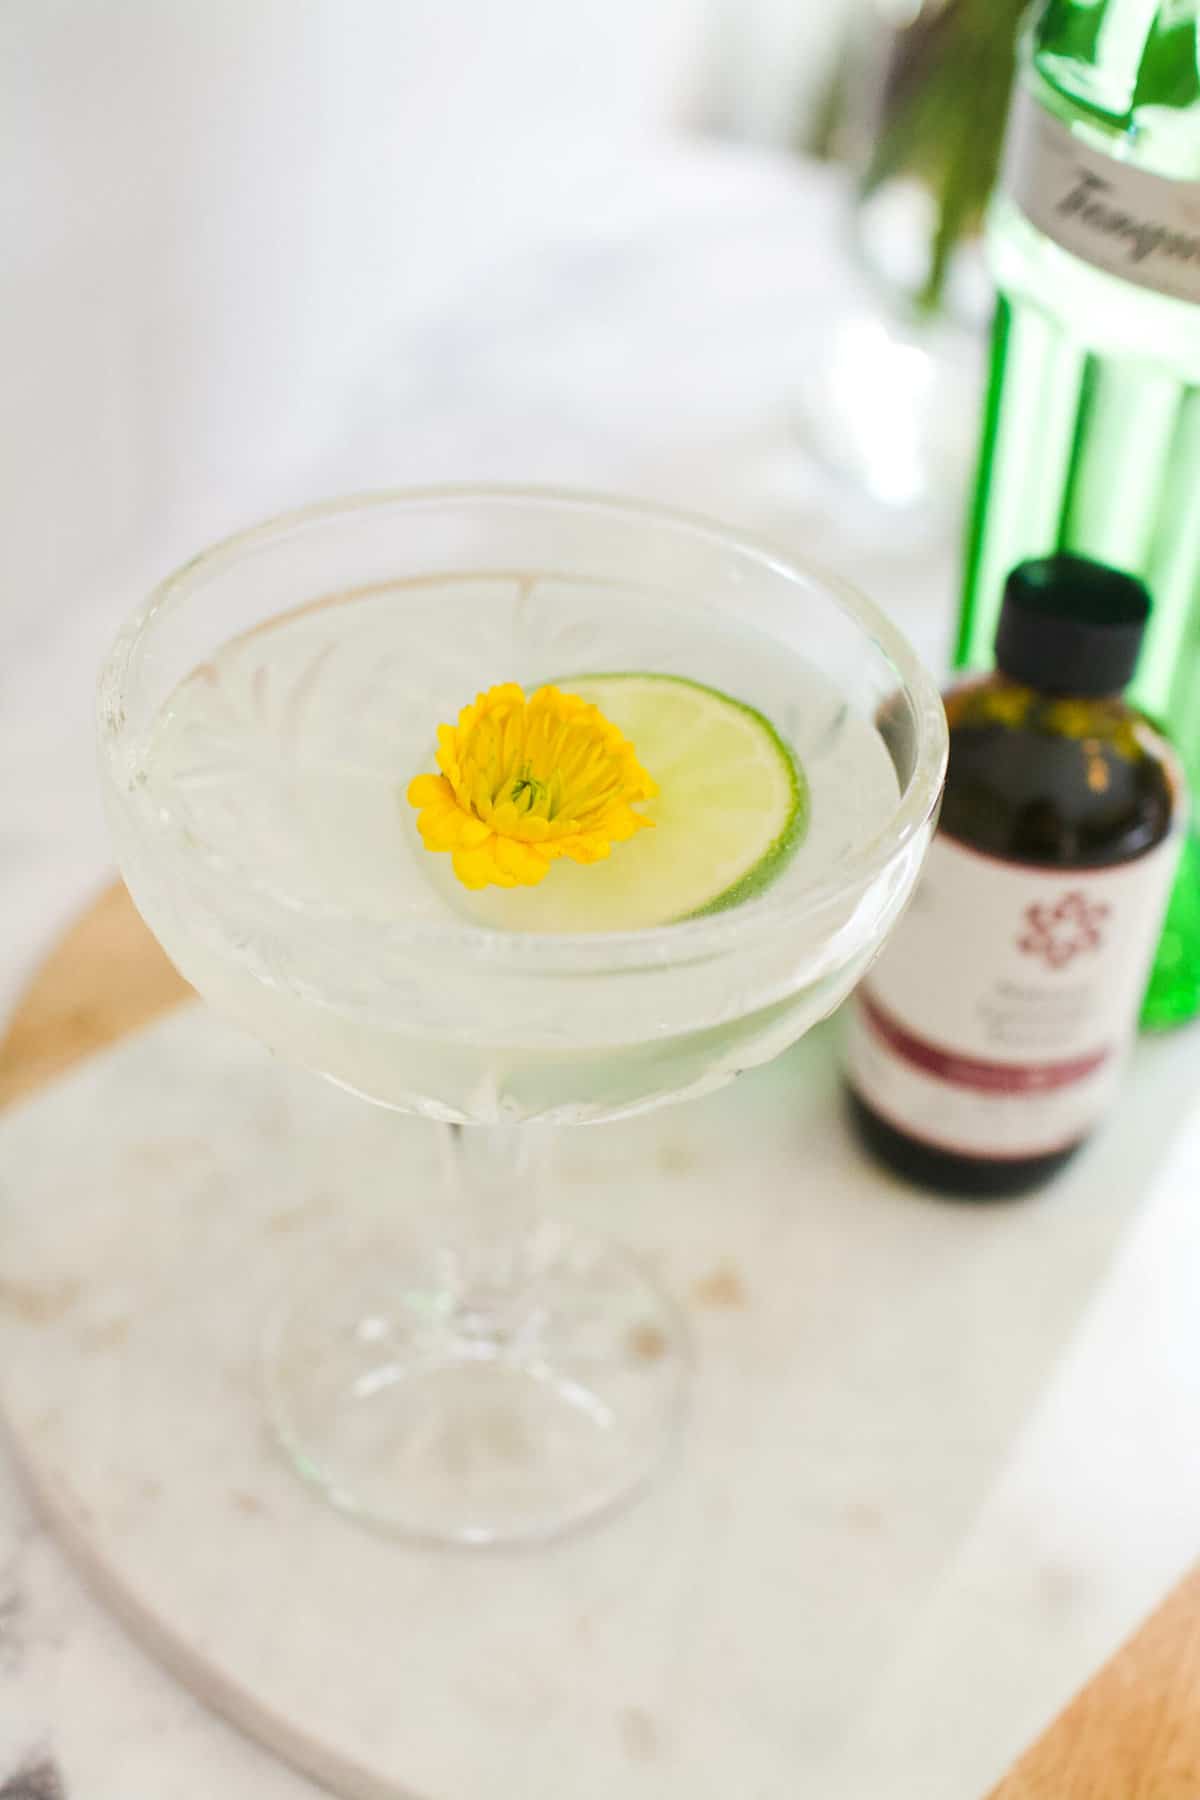 A gimlet garnished with a lime wheel and edible flower with a bottle of lavender bitters and gin in the background.